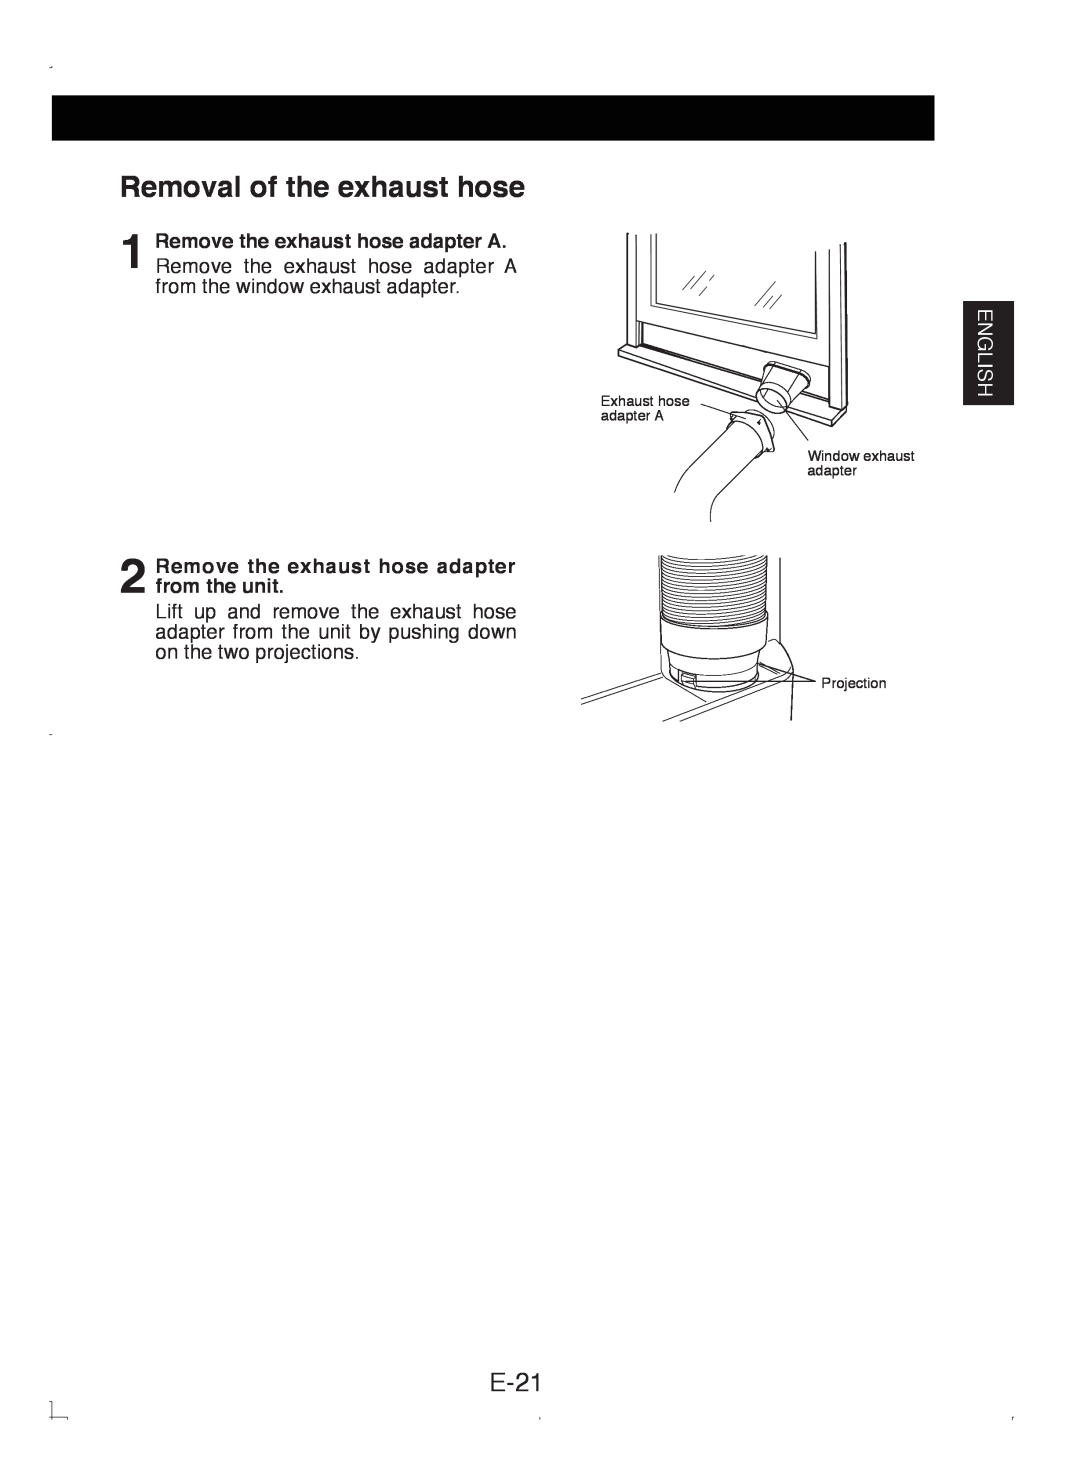 Sony CV-P12PX operation manual Removal of the exhaust hose, E-21, English 